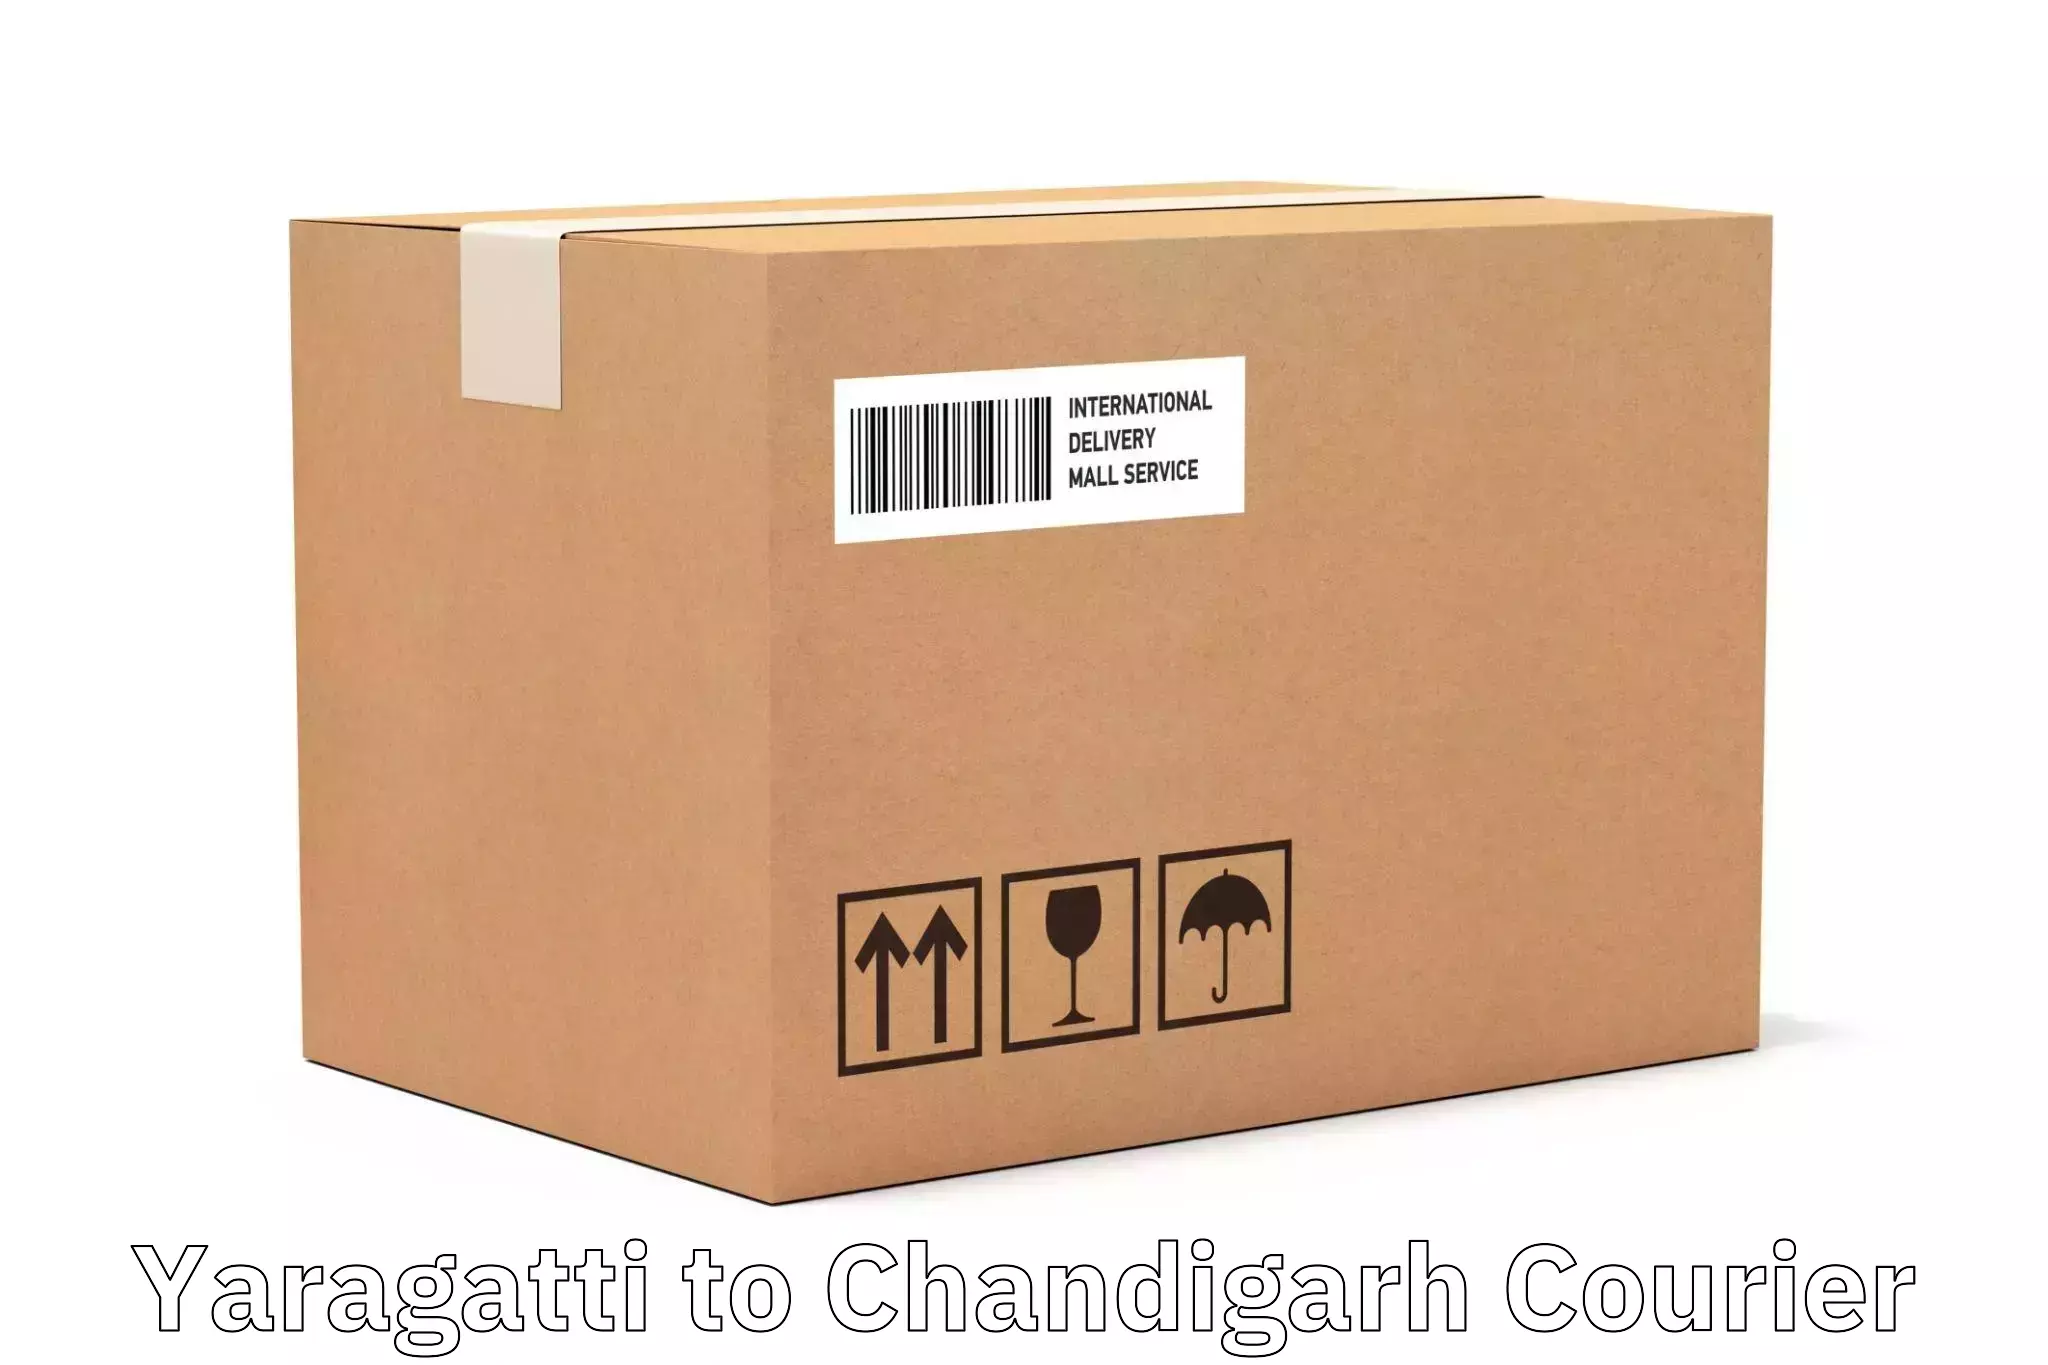 High-capacity courier solutions Yaragatti to Chandigarh